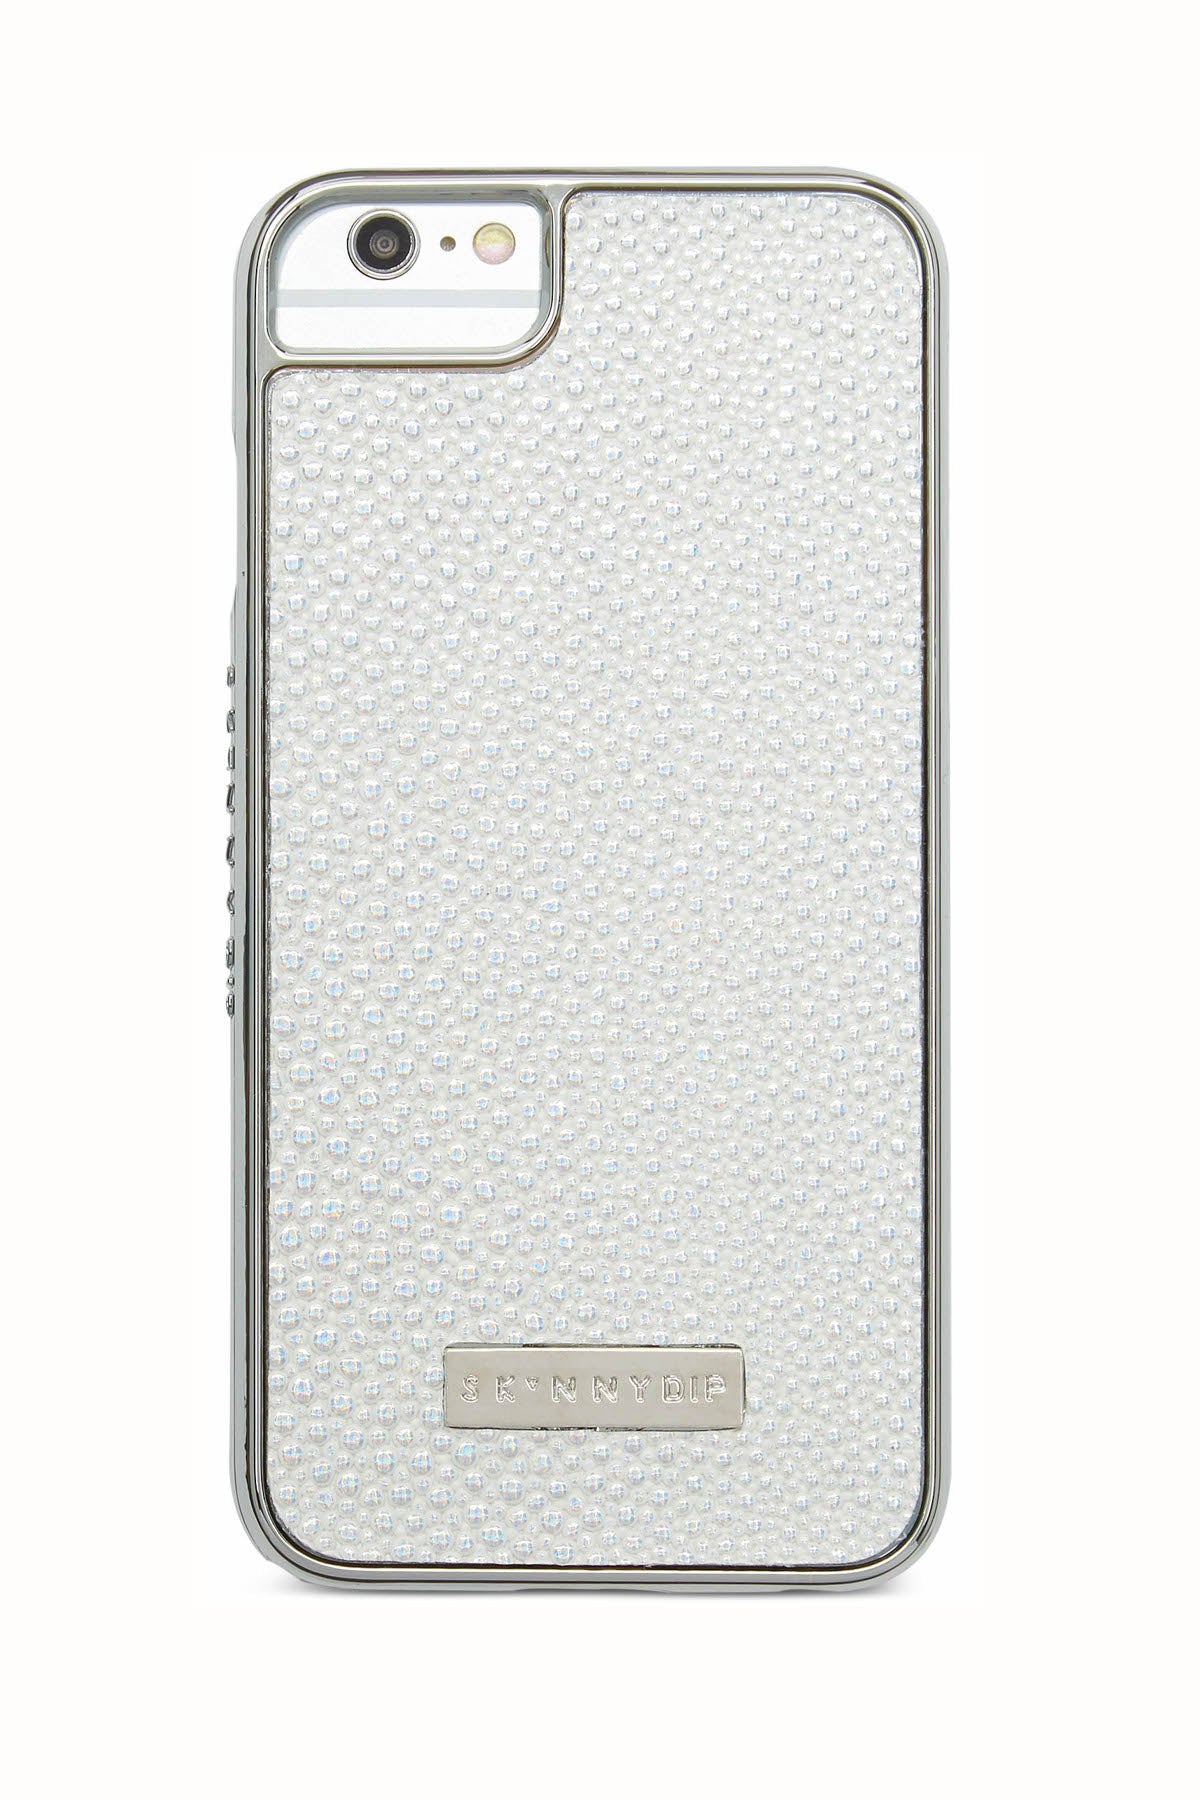 Skinnydip London White Shimmer iPhone Case & Screen Protector